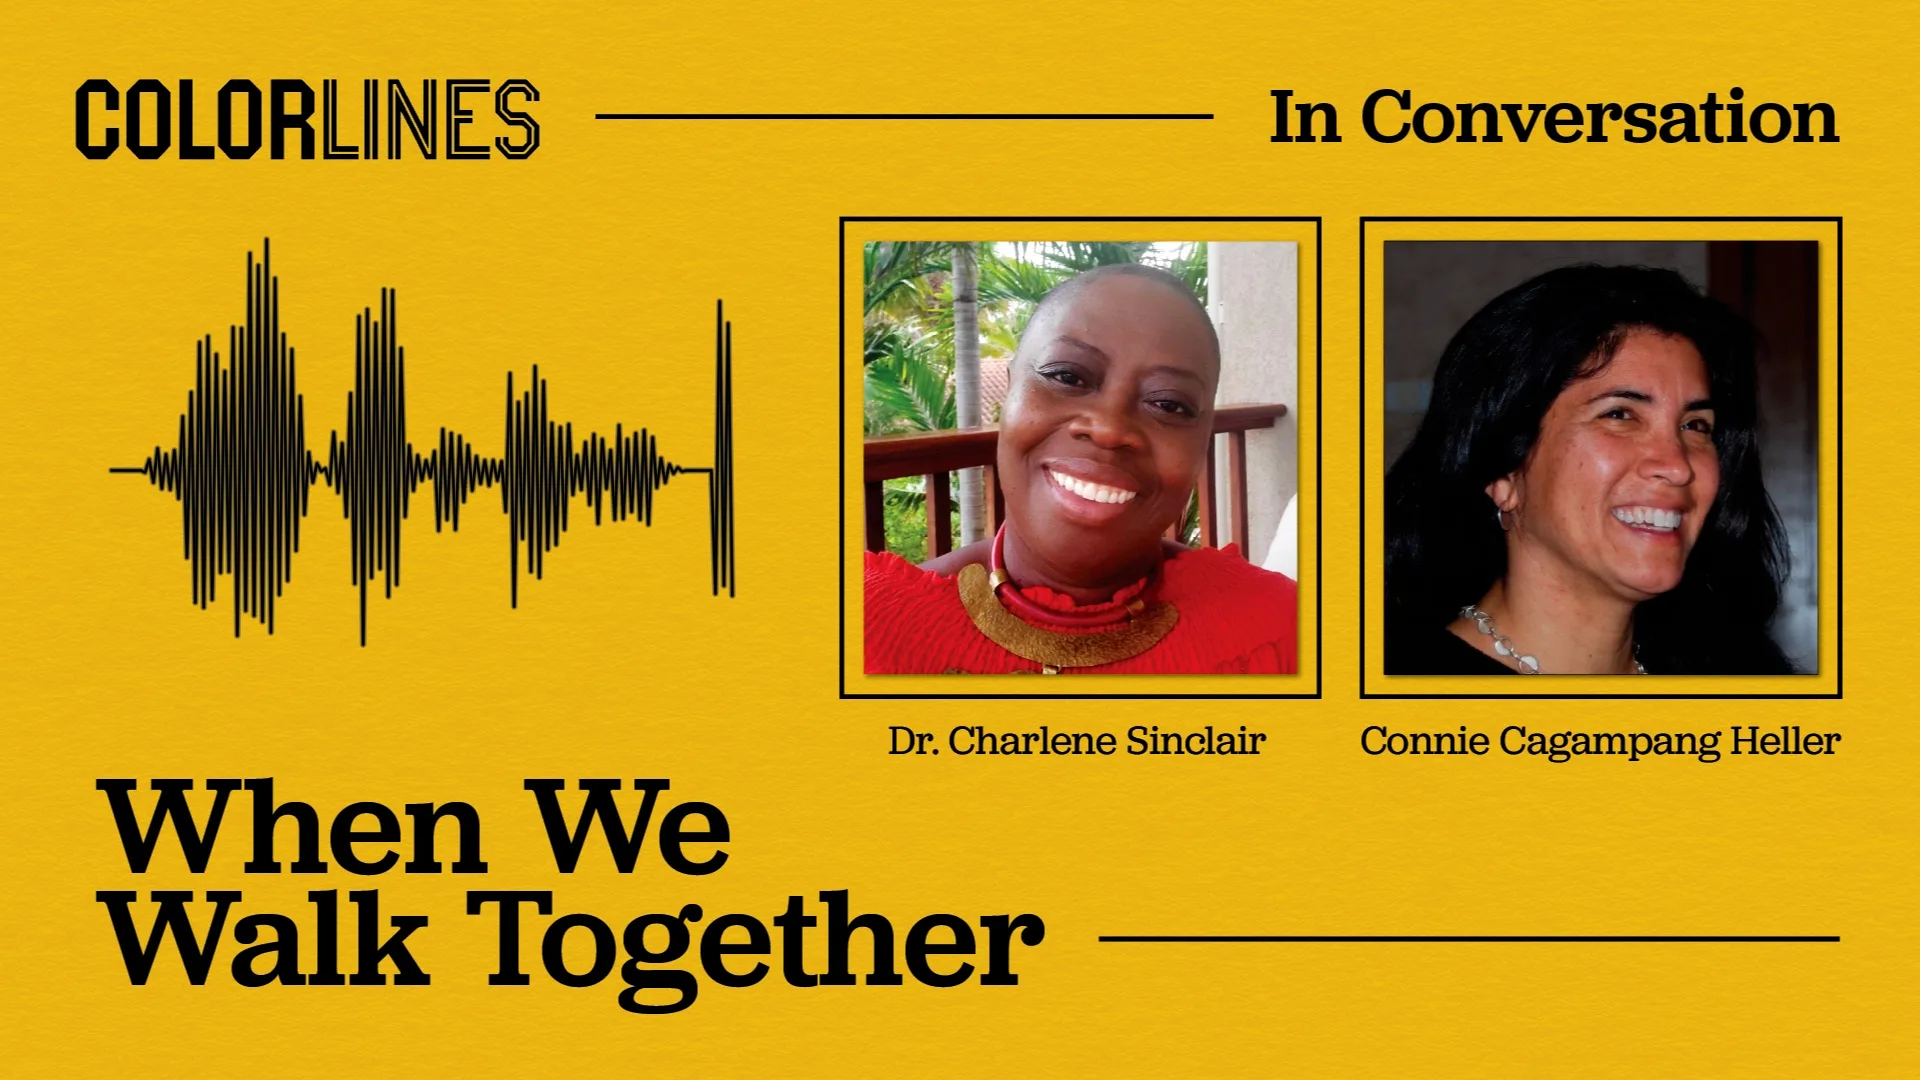 Poster image for audio conversation between Charlene Sinclaire and Connie Heller showing both of their faces and an audio wave form.